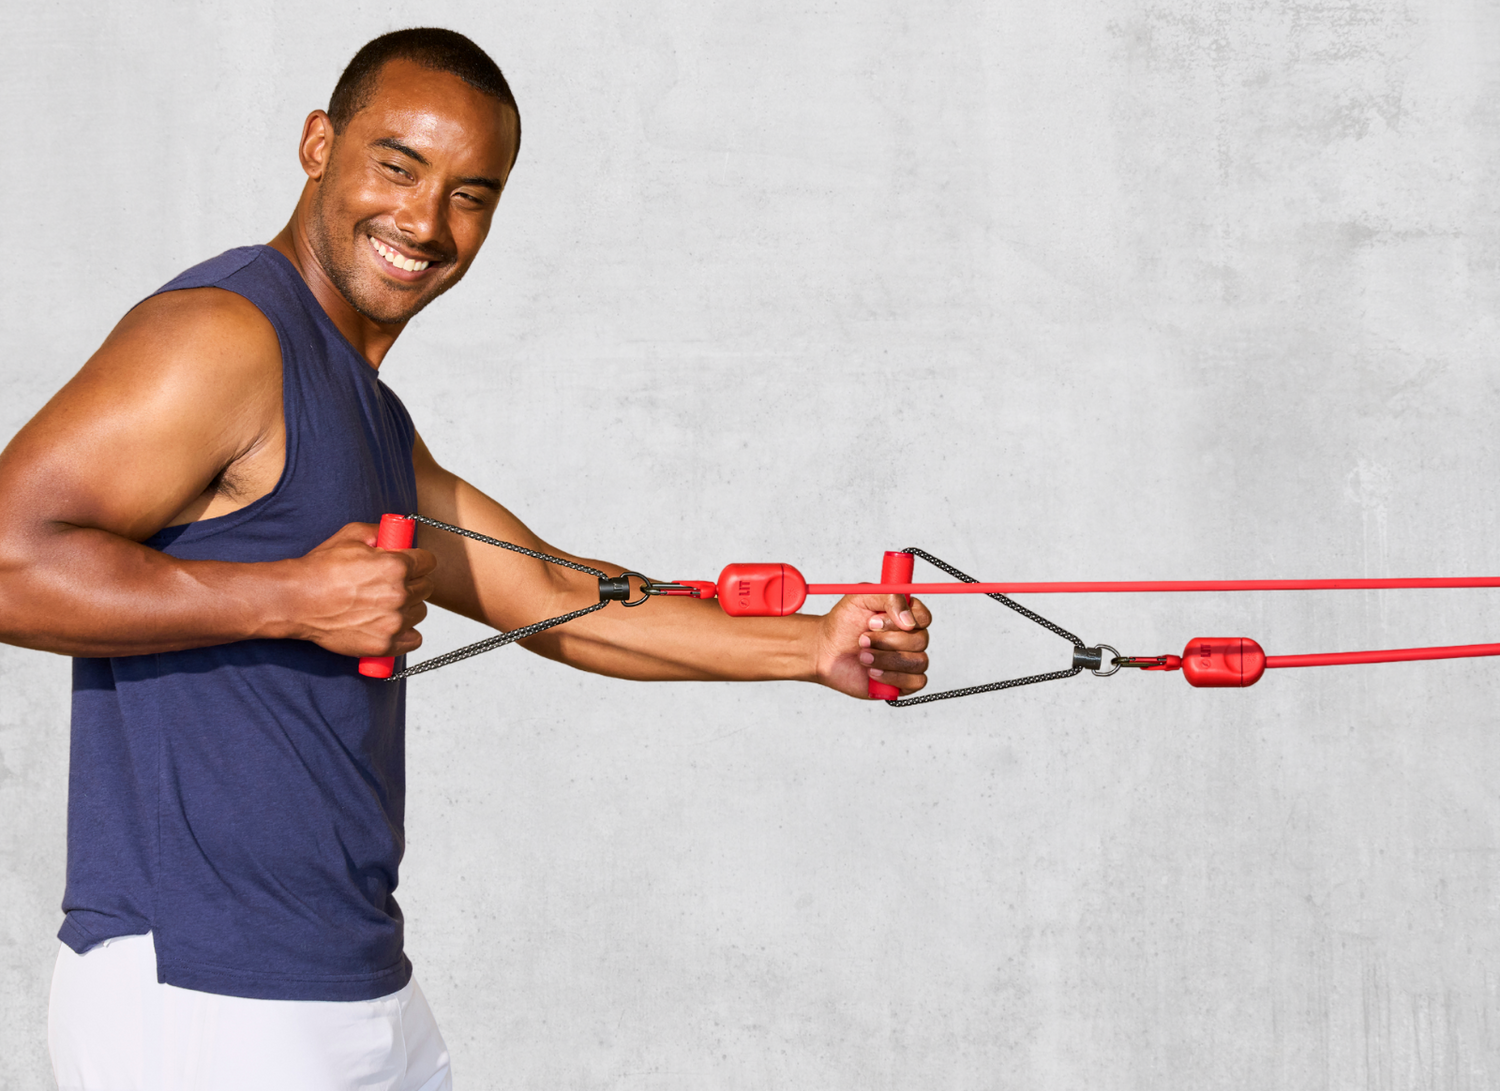 10 Mini-Band Exercises for a Full-Body Workout at Home